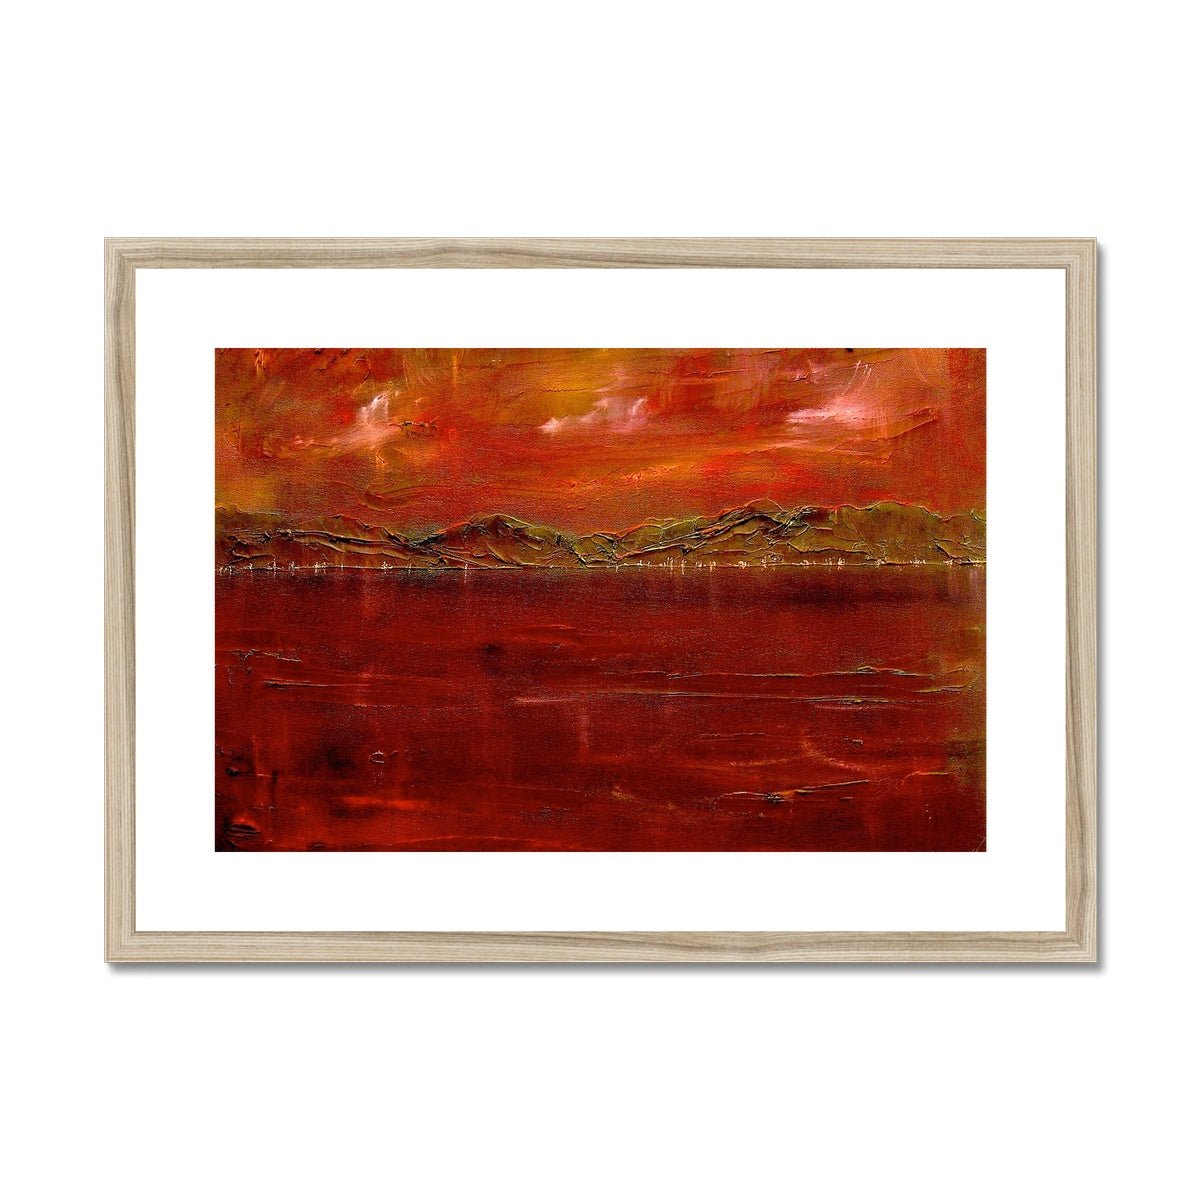 Deep Clyde Dusk Painting | Framed & Mounted Prints From Scotland-Framed & Mounted Prints-River Clyde Art Gallery-A2 Landscape-Natural Frame-Paintings, Prints, Homeware, Art Gifts From Scotland By Scottish Artist Kevin Hunter